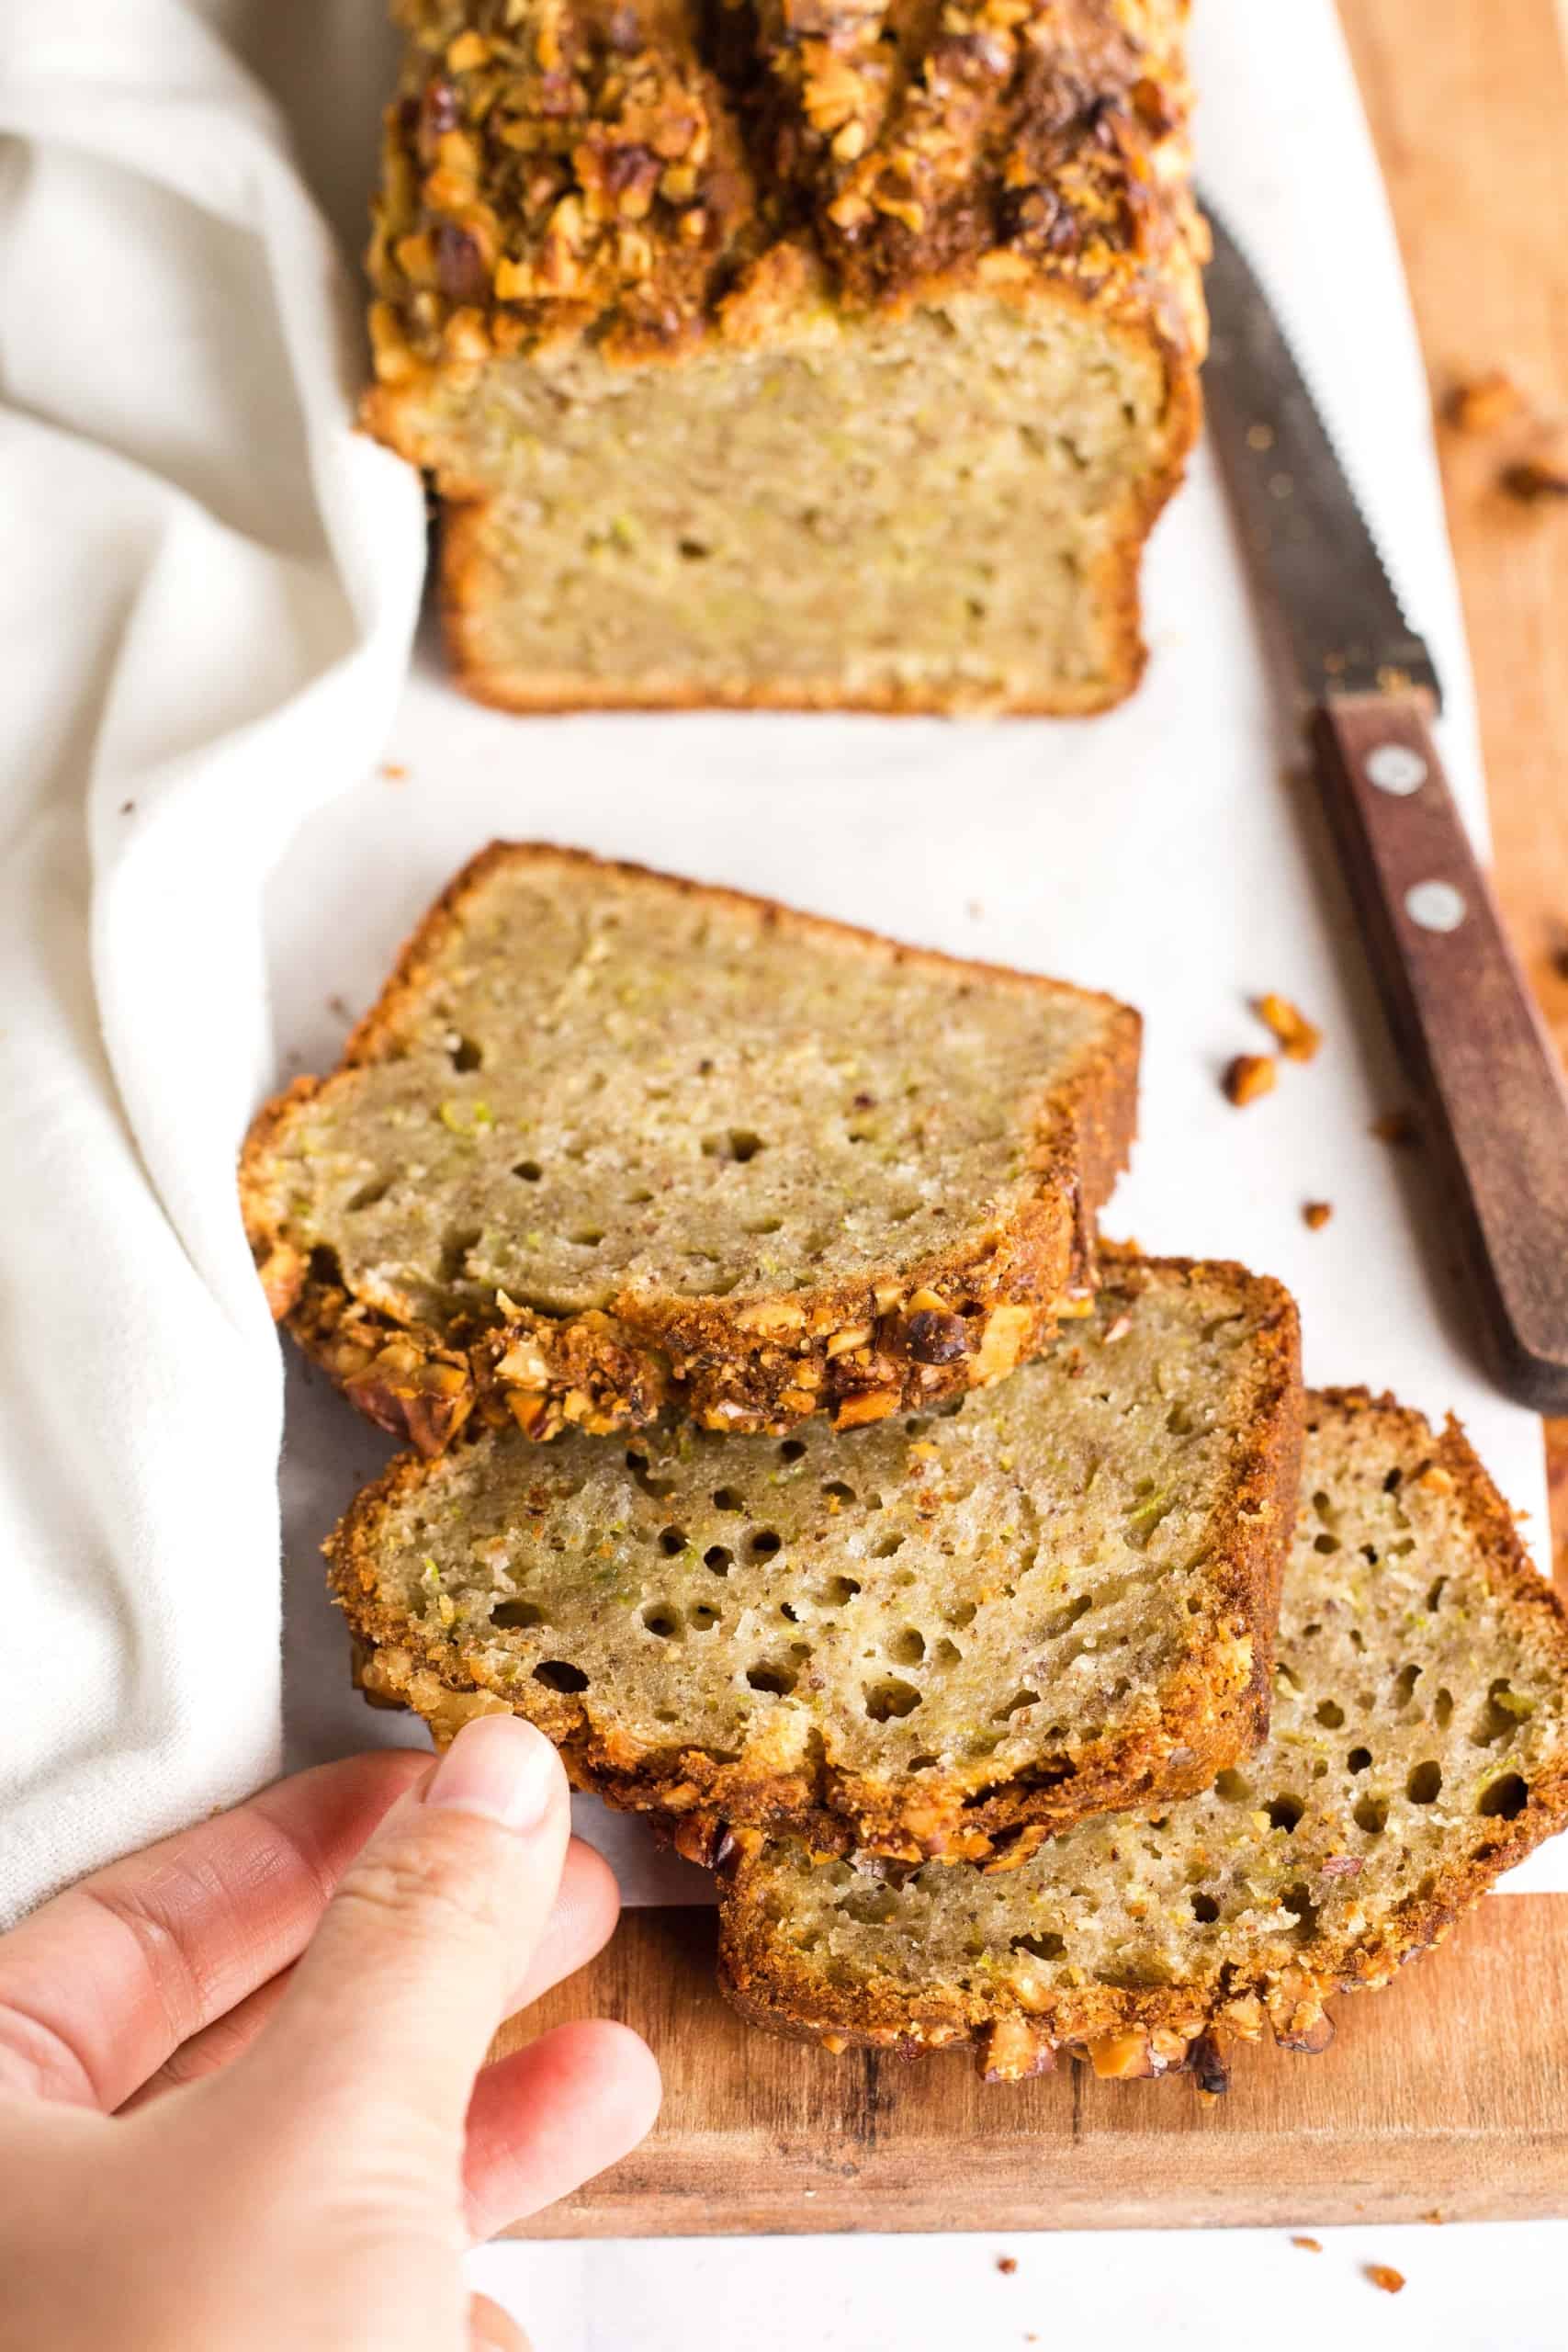 Hand reaching for a slice of gluten-free zucchini bread.